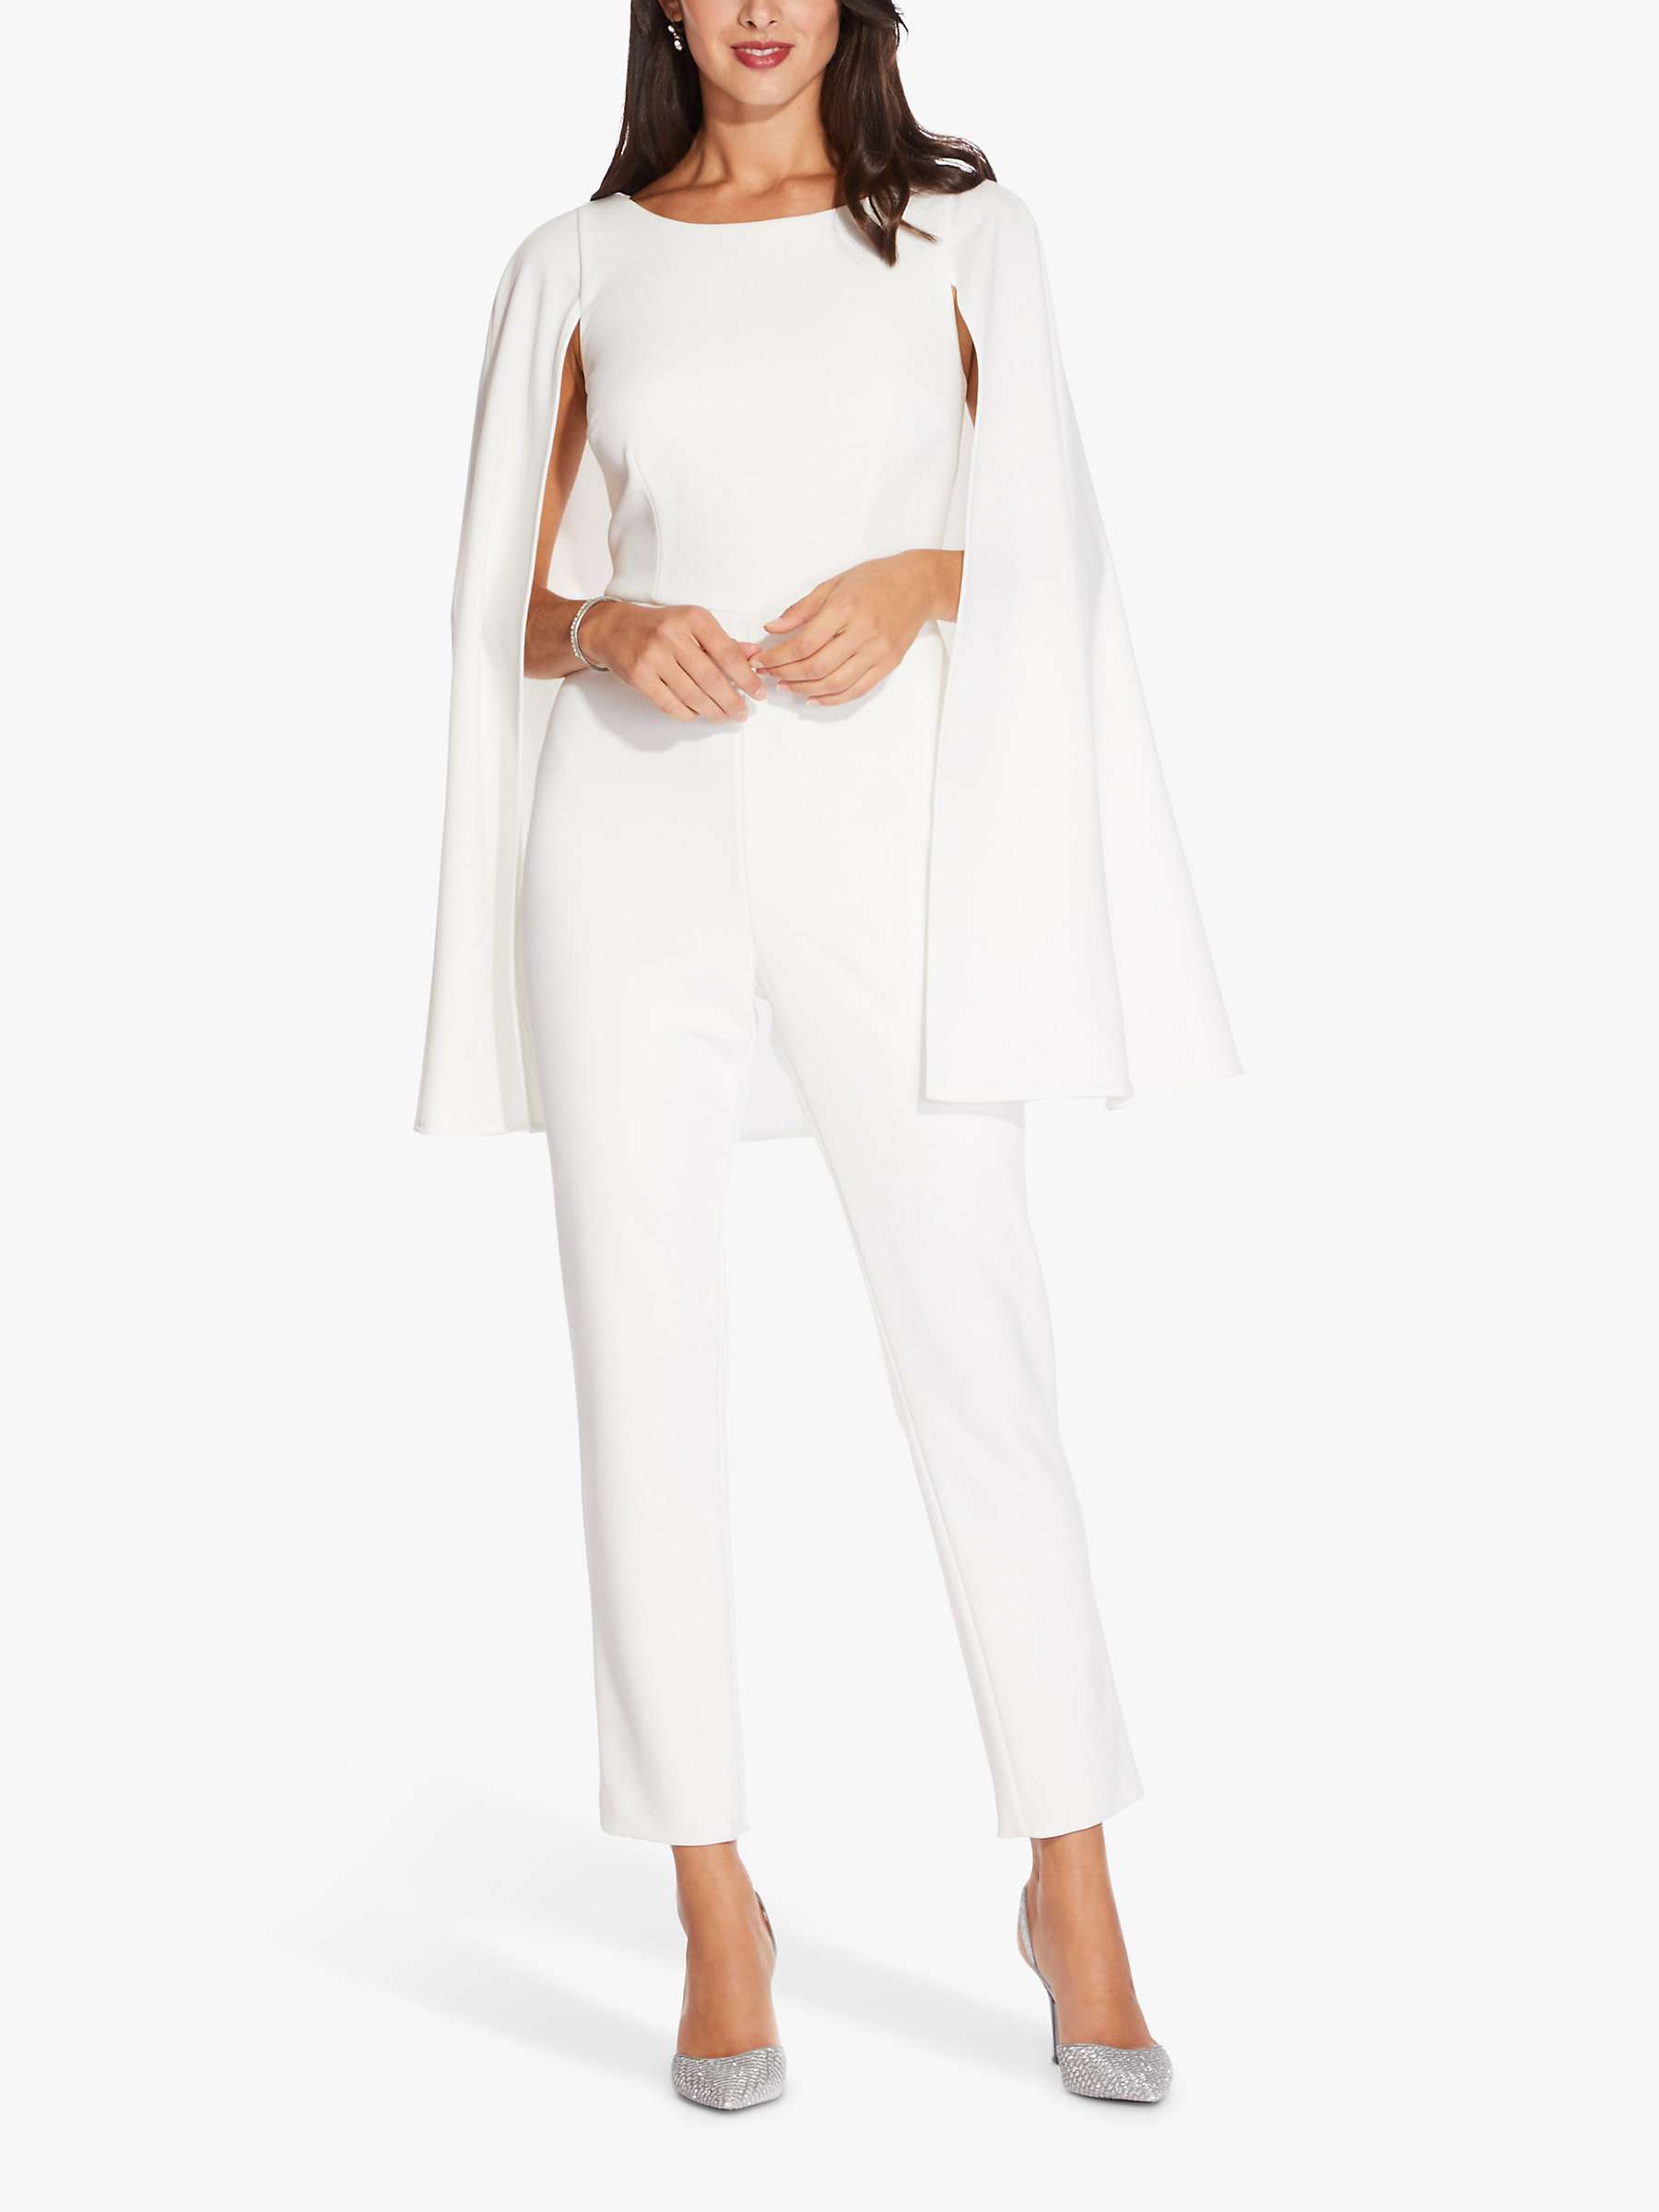 Buy Adrianna Papell Knit Crepe Cape Jumpsuit, Ivory Online at johnlewis.com